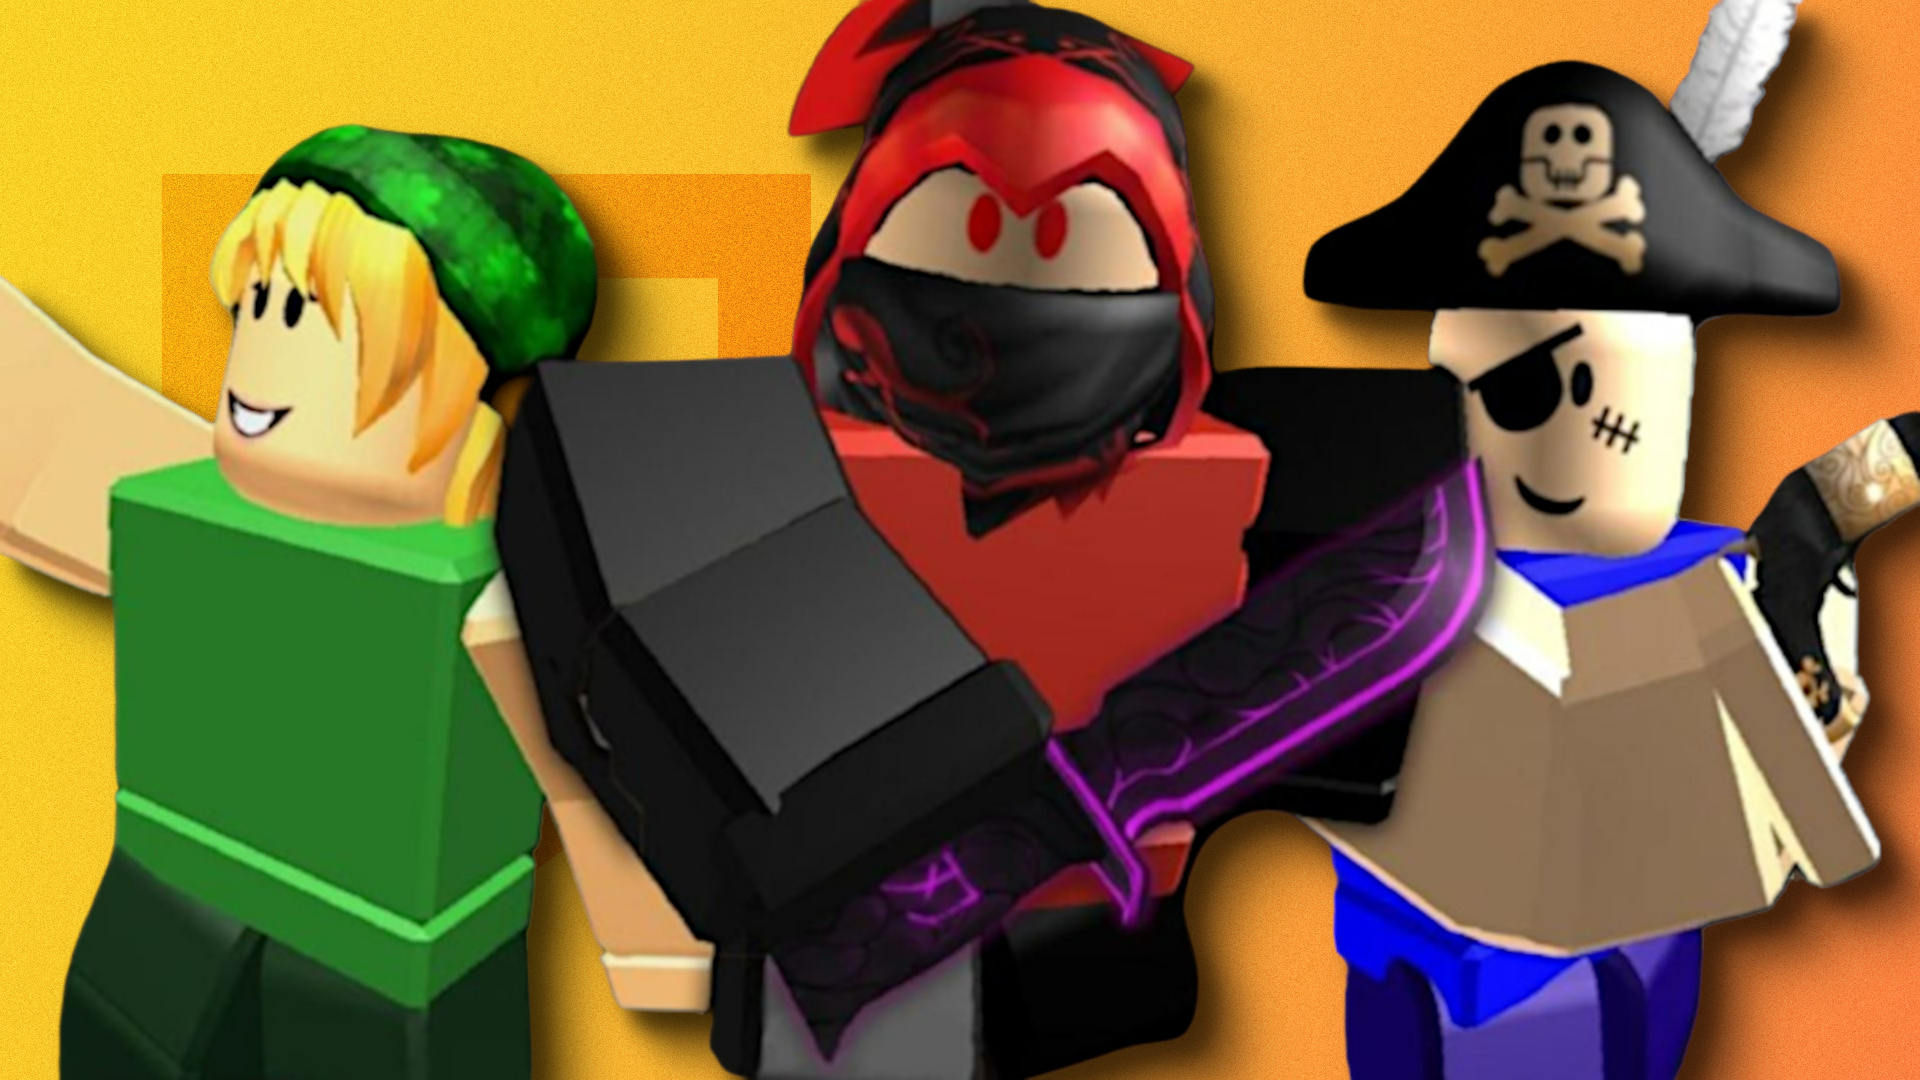 Roblox Murder Mystery 2 value list (July 2022)